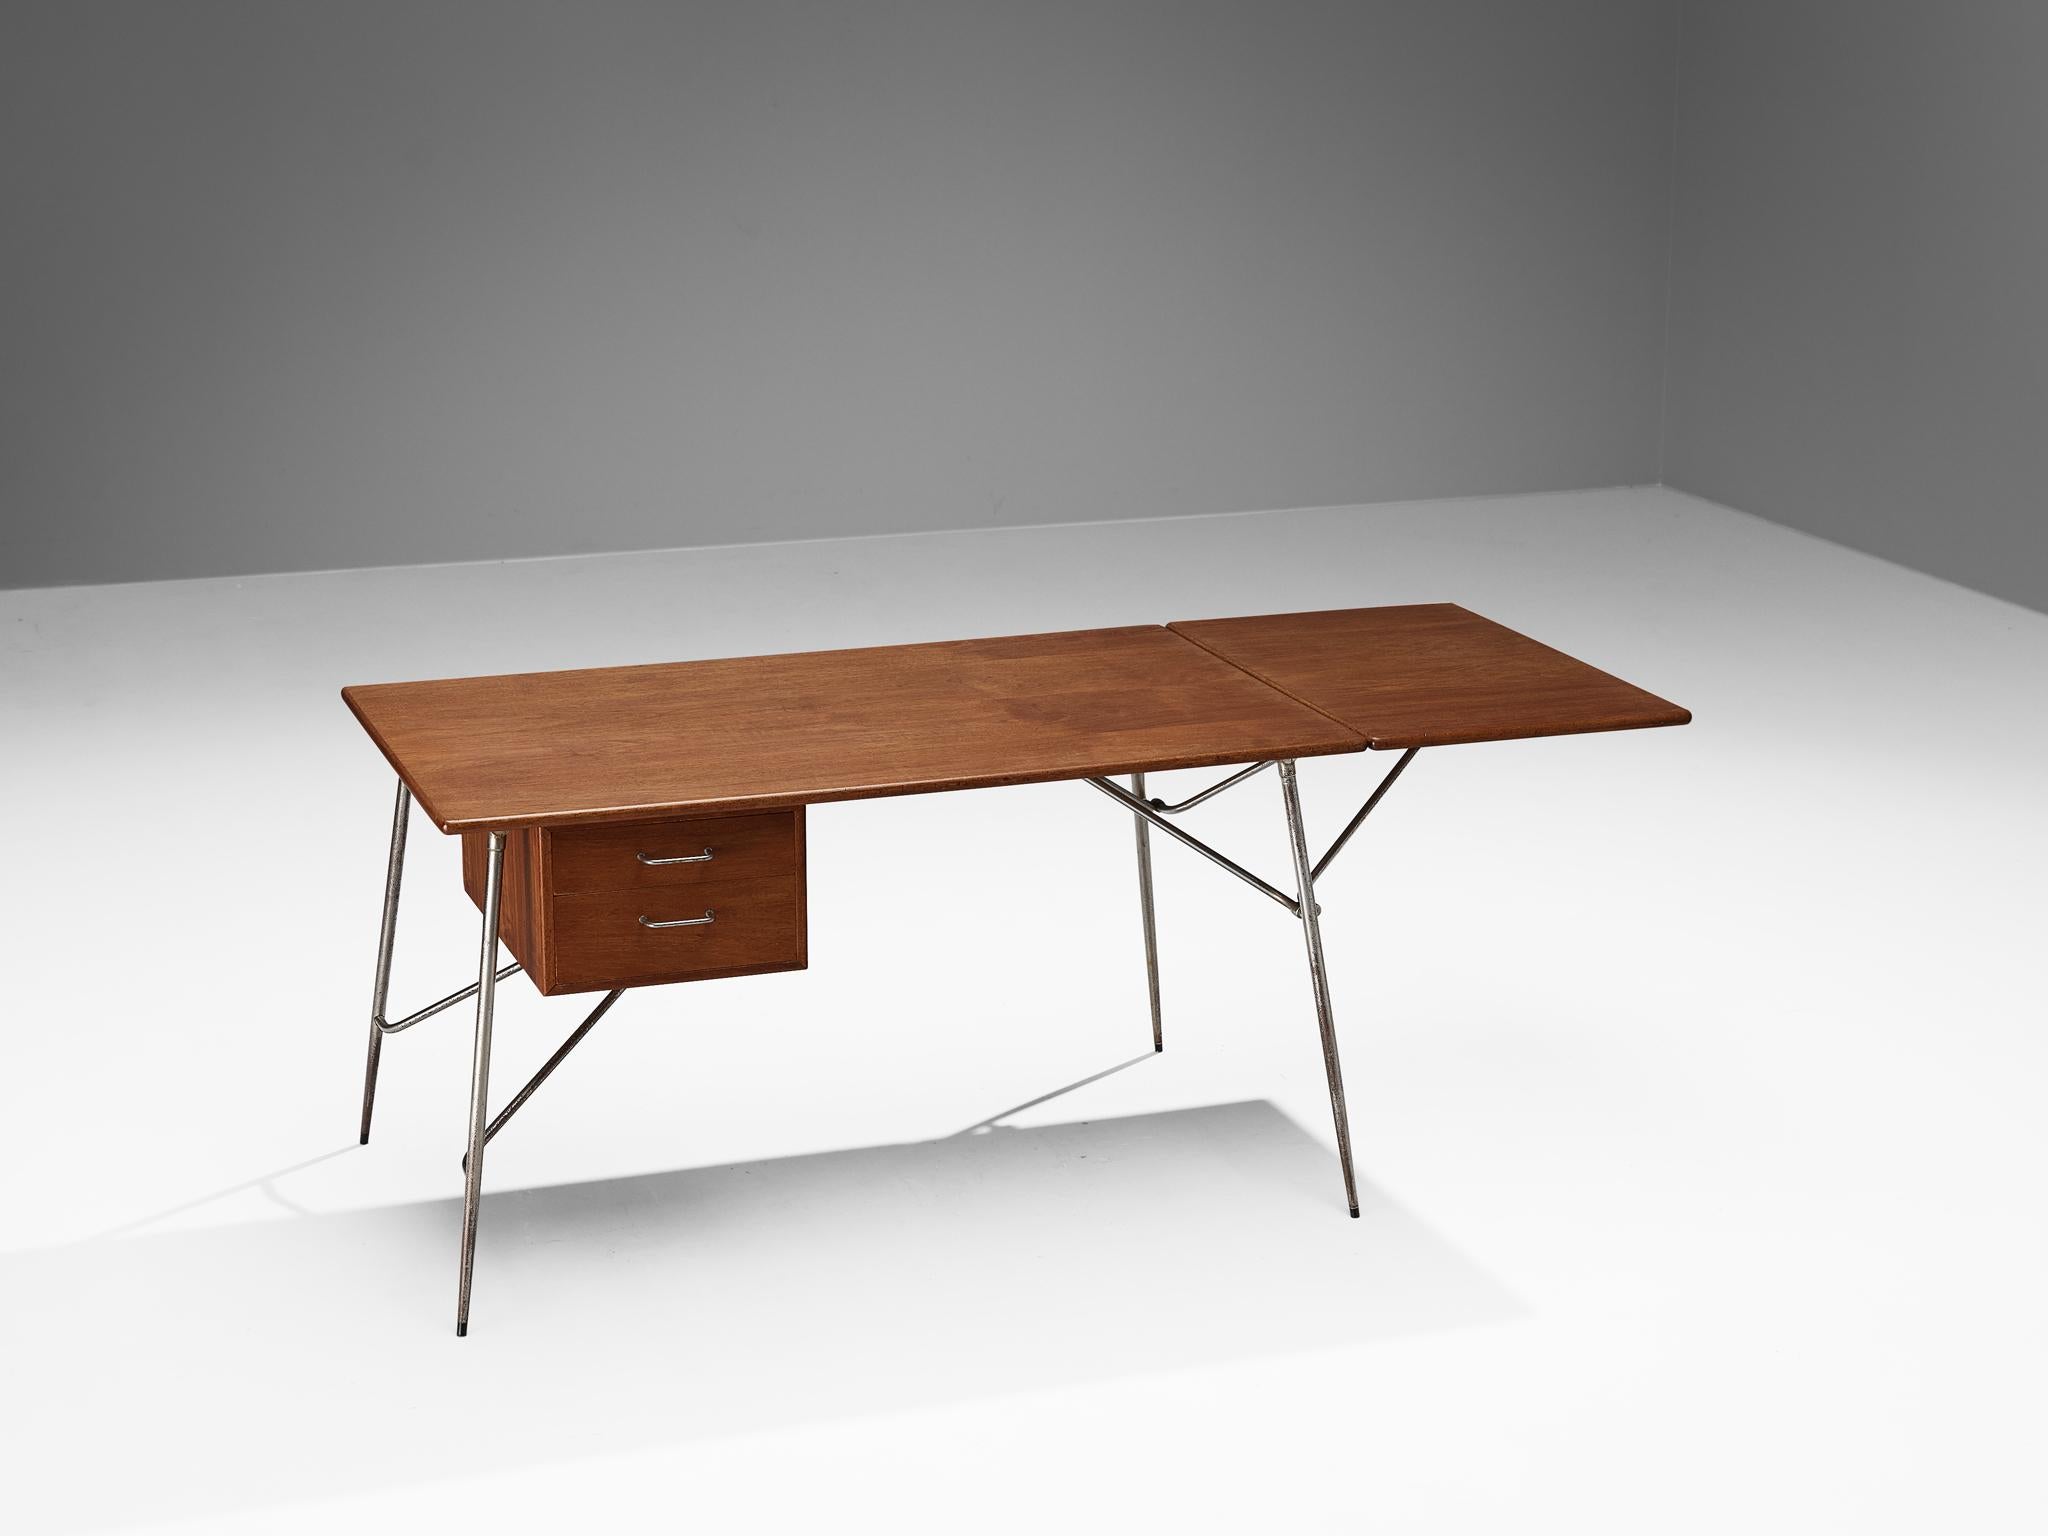 Børge Mogensen for Søborg Møbelfabrik, desk, model '203', teak and steel, Denmark, 1953.

This Scandinavian modern desk features an open construction with clear lines and angular shapes dominating the layout. The tabletop and drawer compartment are